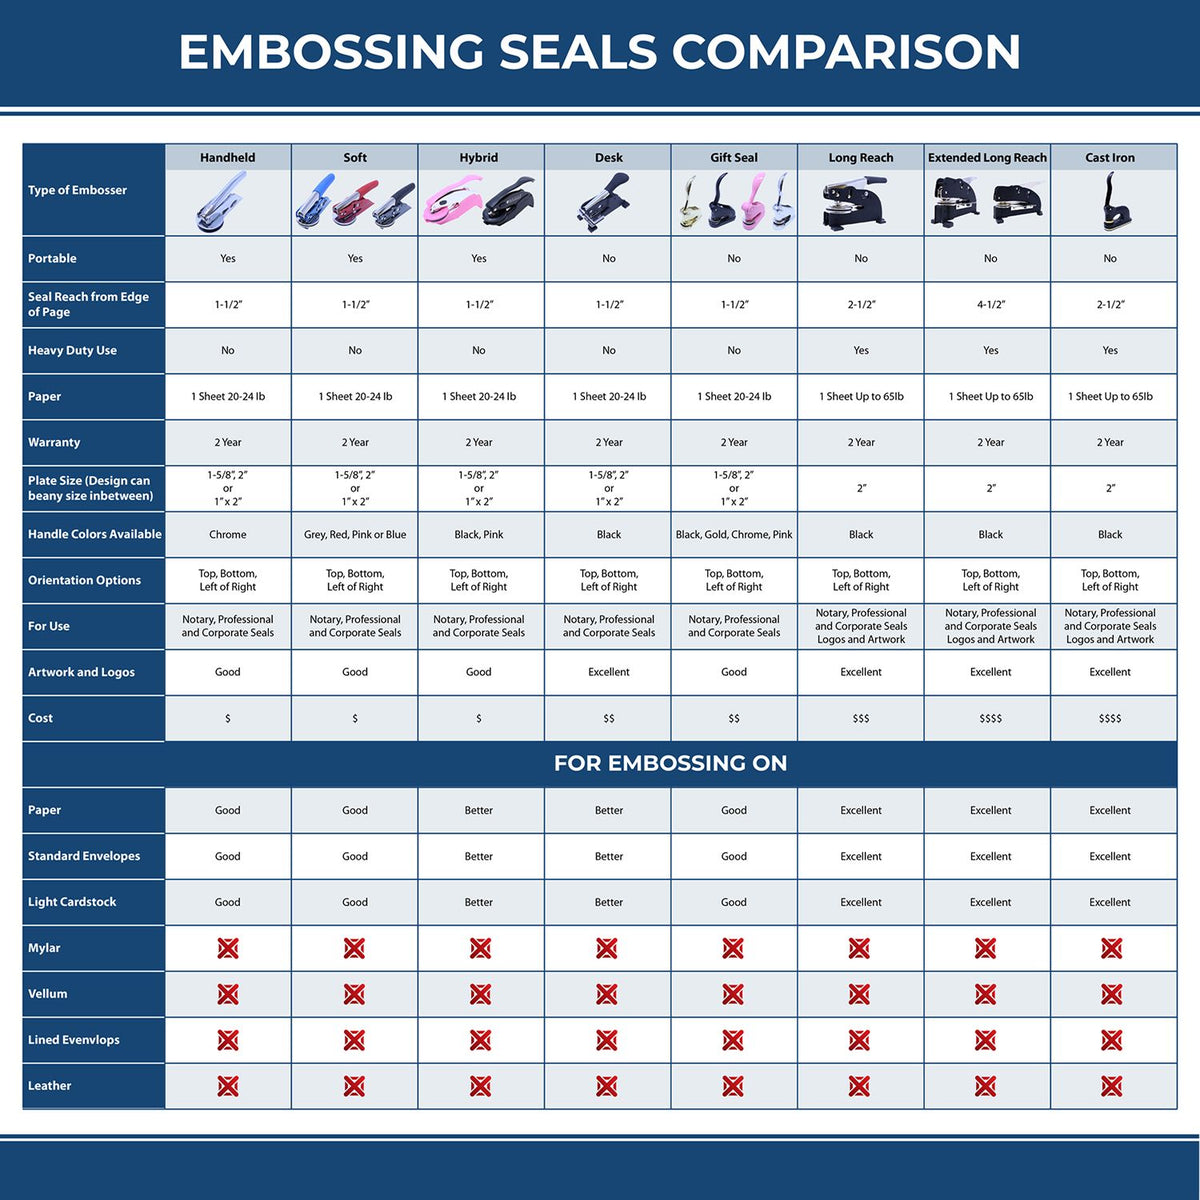 A comparison chart for the different types of mount models available for the Gift Vermont Land Surveyor Seal